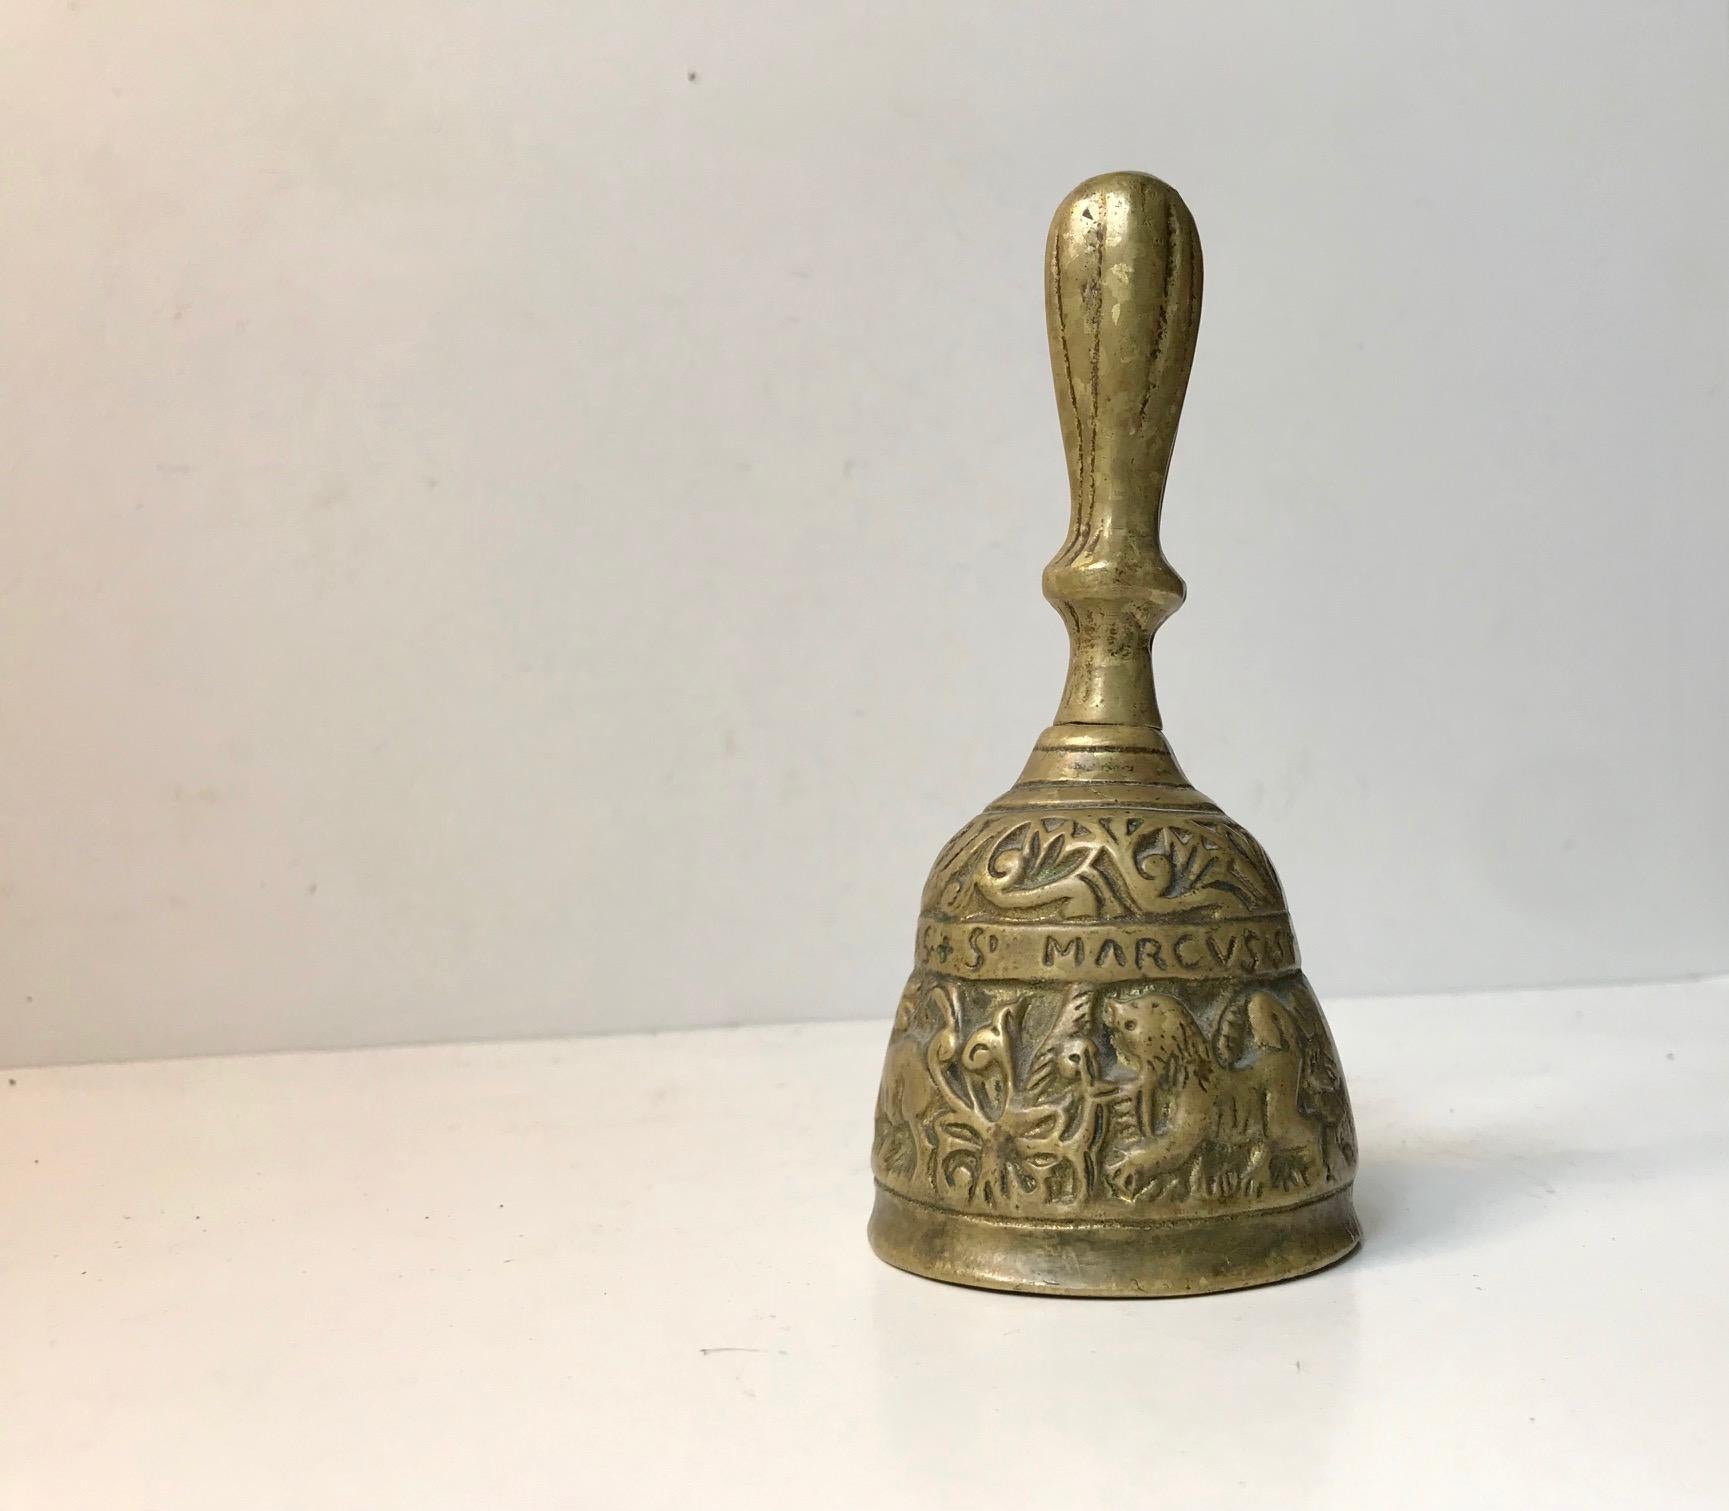 Ancient looking Apostle hand/table/servant bell with figurines and the names of the 4 Evangelist's: Matheus, Marcus, Lucas, and Johannes. This bell has been copied a lot so despite having the right handle type and patina to the brass we are